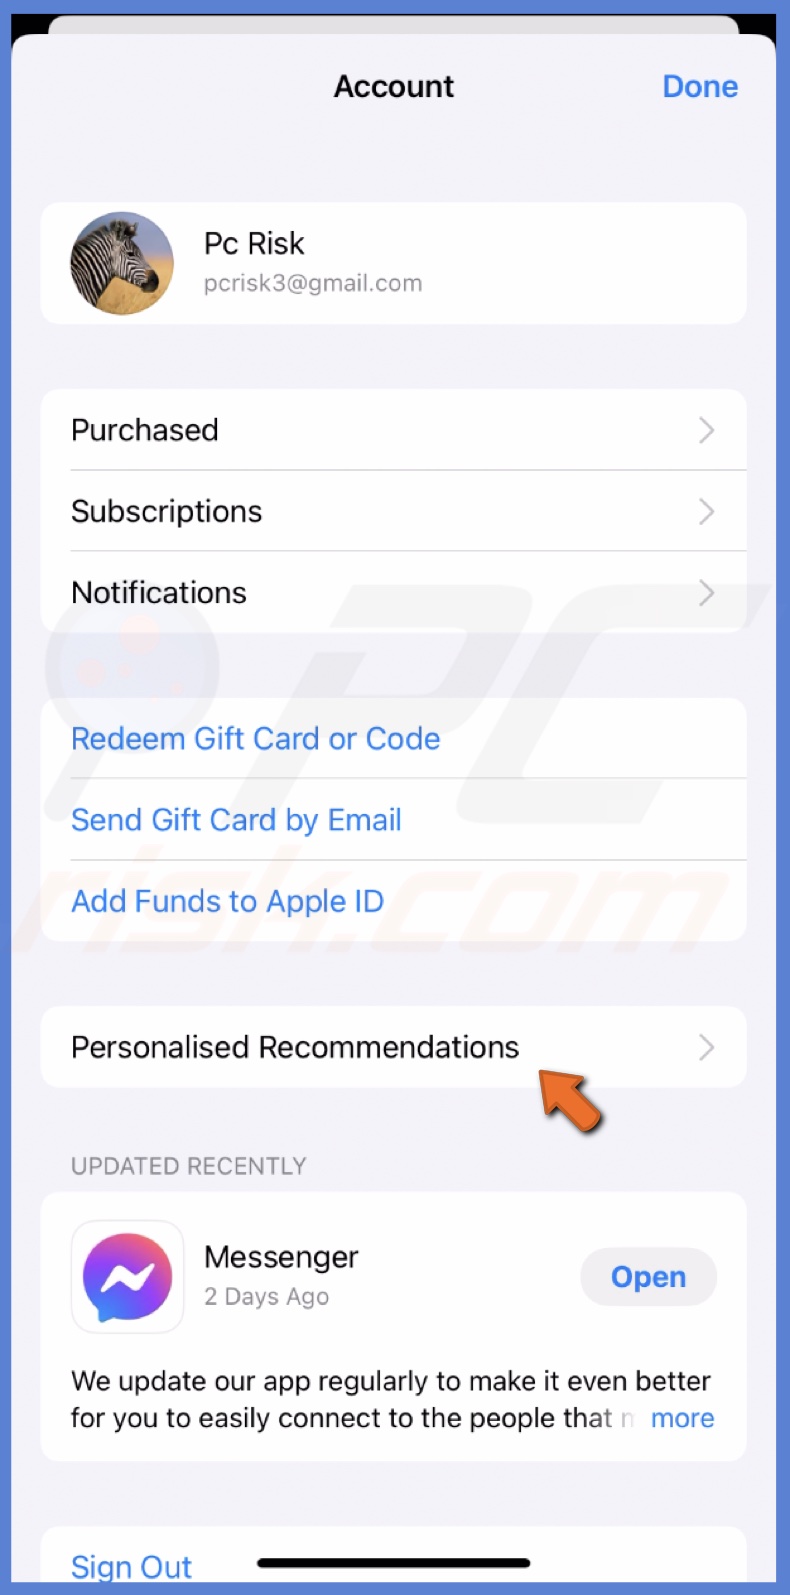 Select Personalised Recommendations